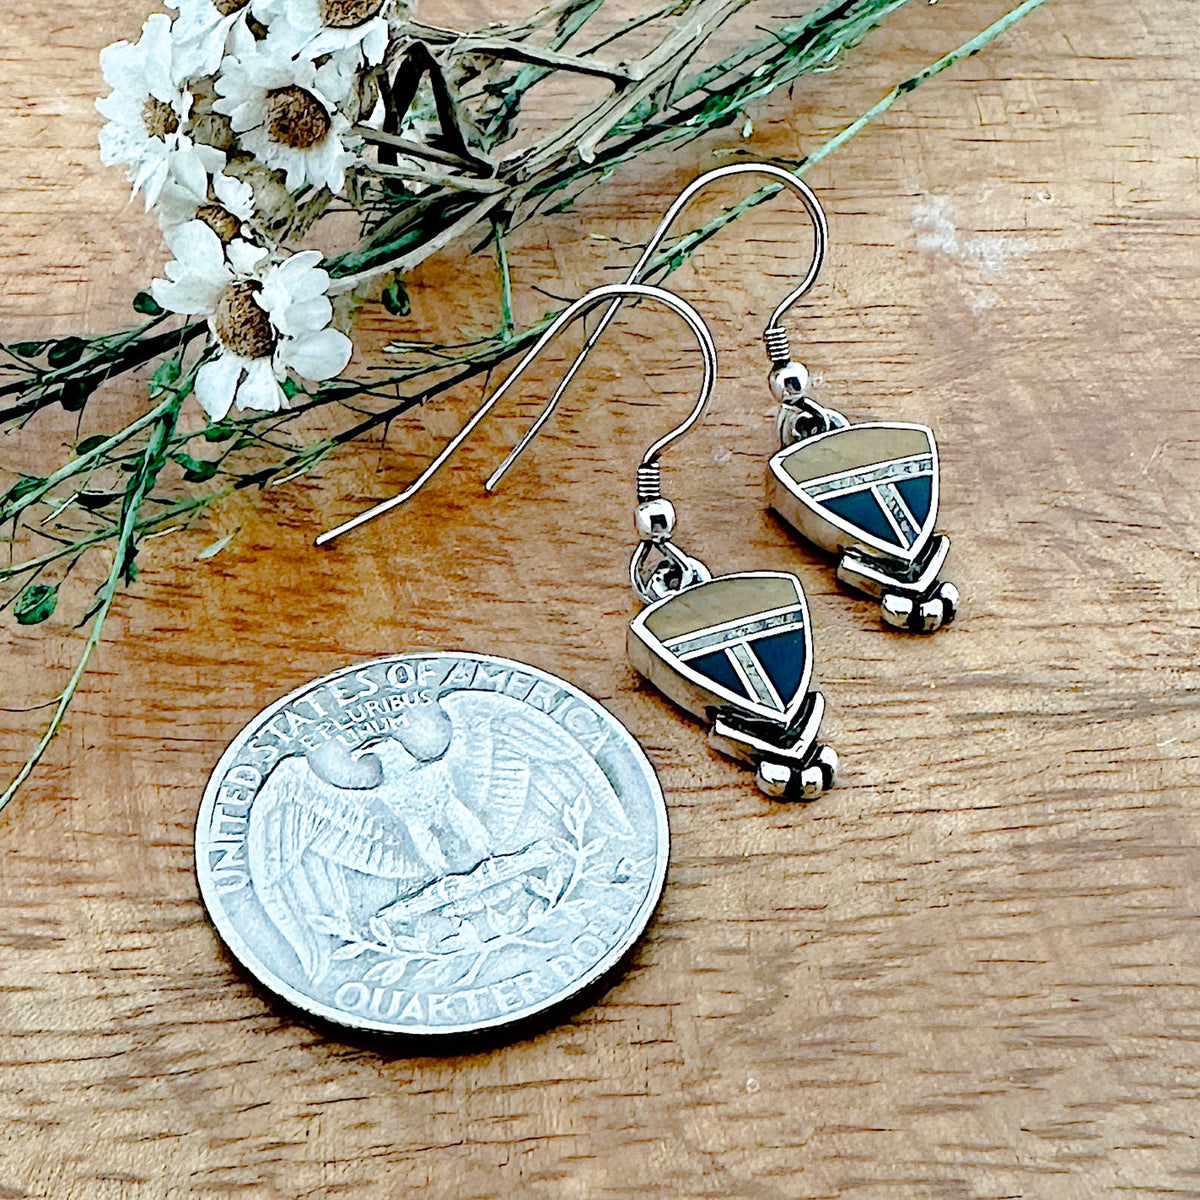 Size Comparison with US coin.Navajo inlay earrings inlaid with Black Jade, Tiger's Eye and Black Jade. David Rosales Collection/ Super Smith